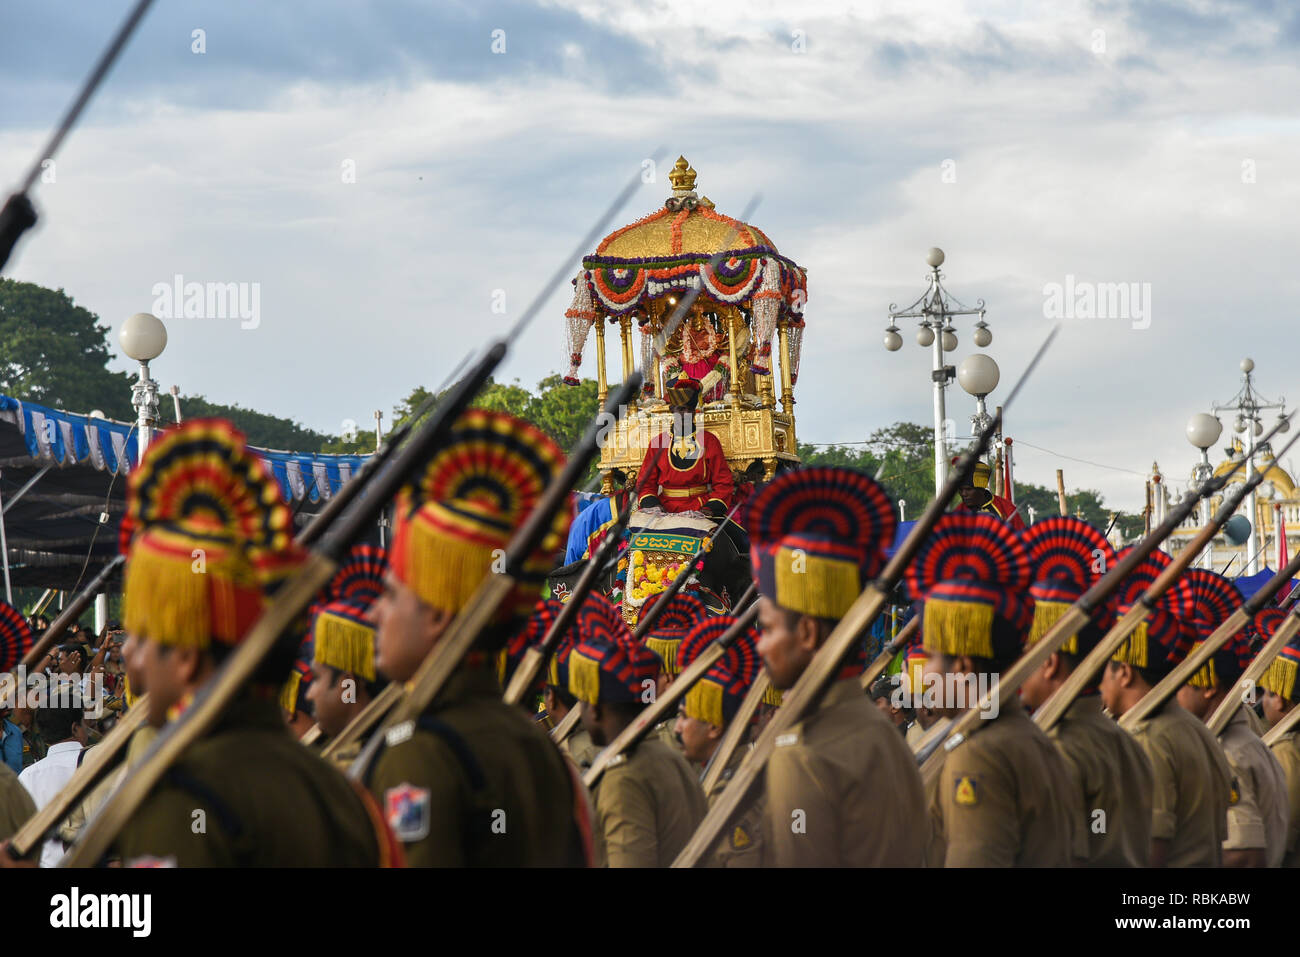 Indian police parade in traditional uniform for Mysore Dussehra ...